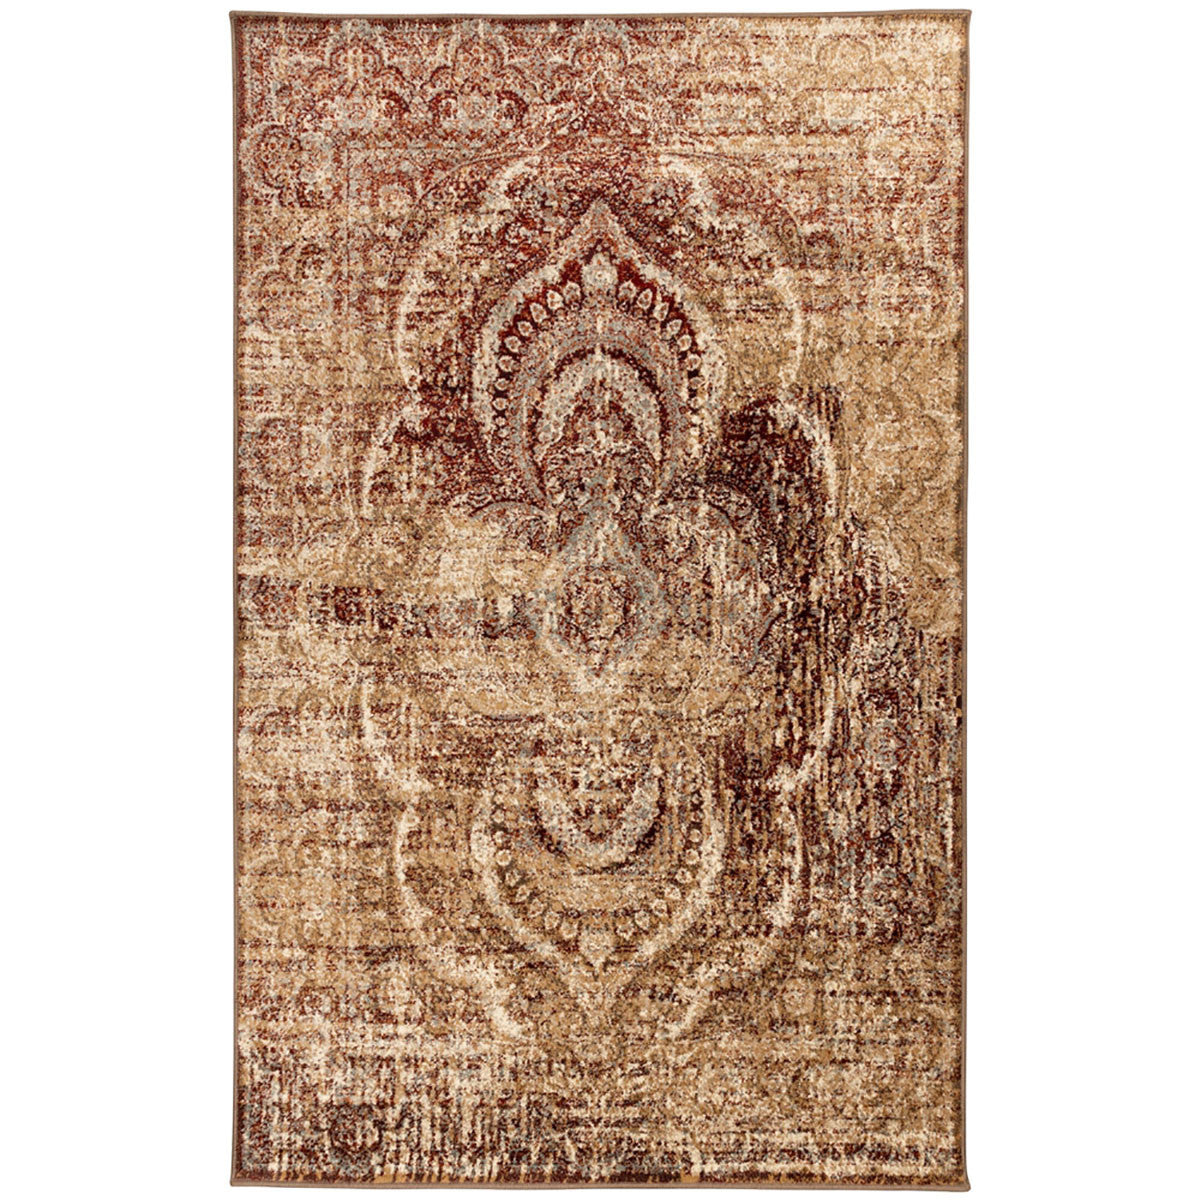 6' X 9' Maroon And Gold Abstract Power Loom Distressed Stain Resistant Area Rug